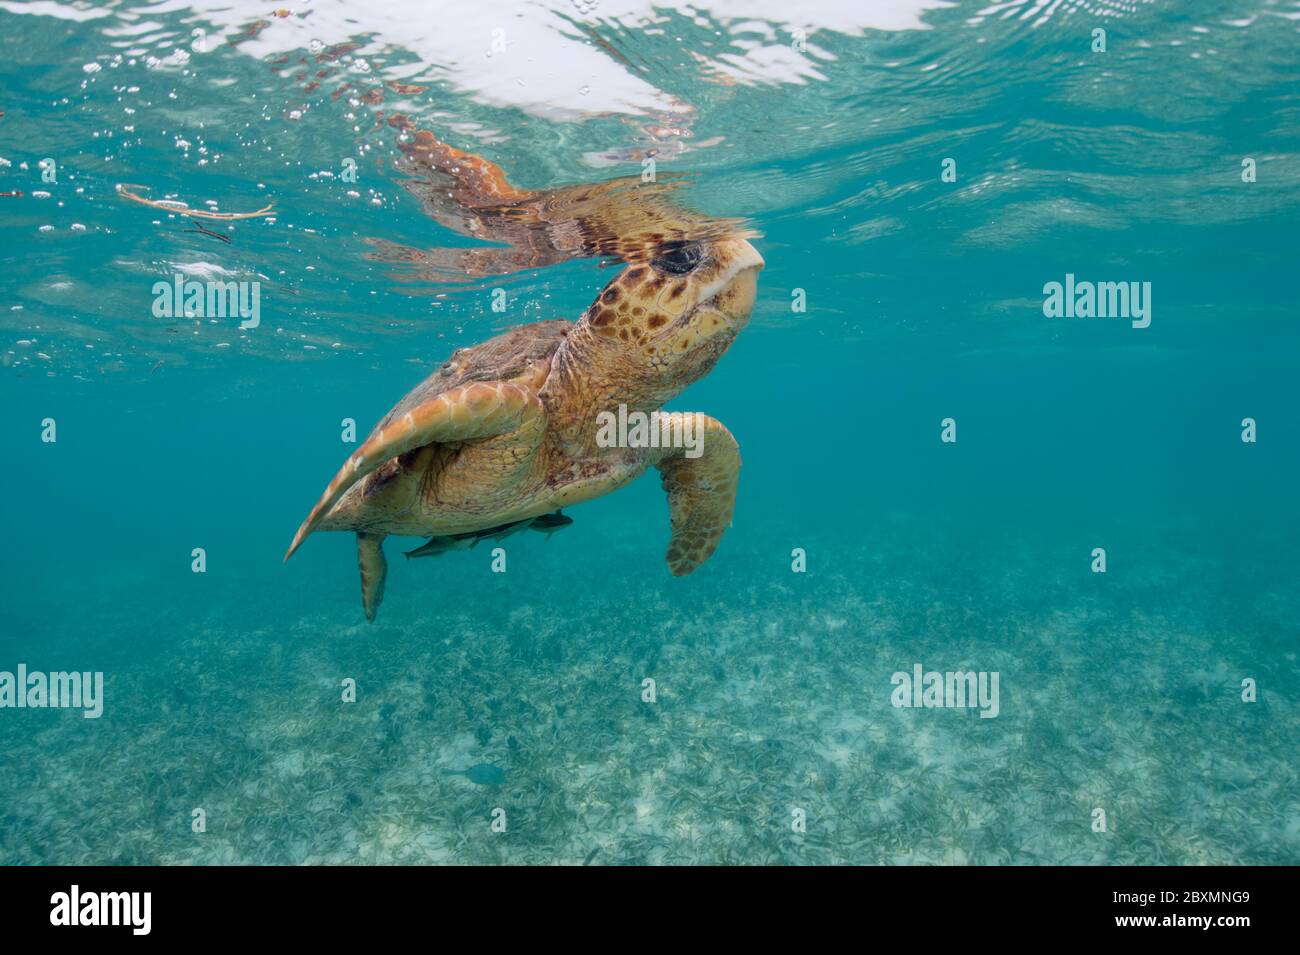 Loggerhead seaturtle is taking a breath from underwater at the Belize Barrier Reef Stock Photo